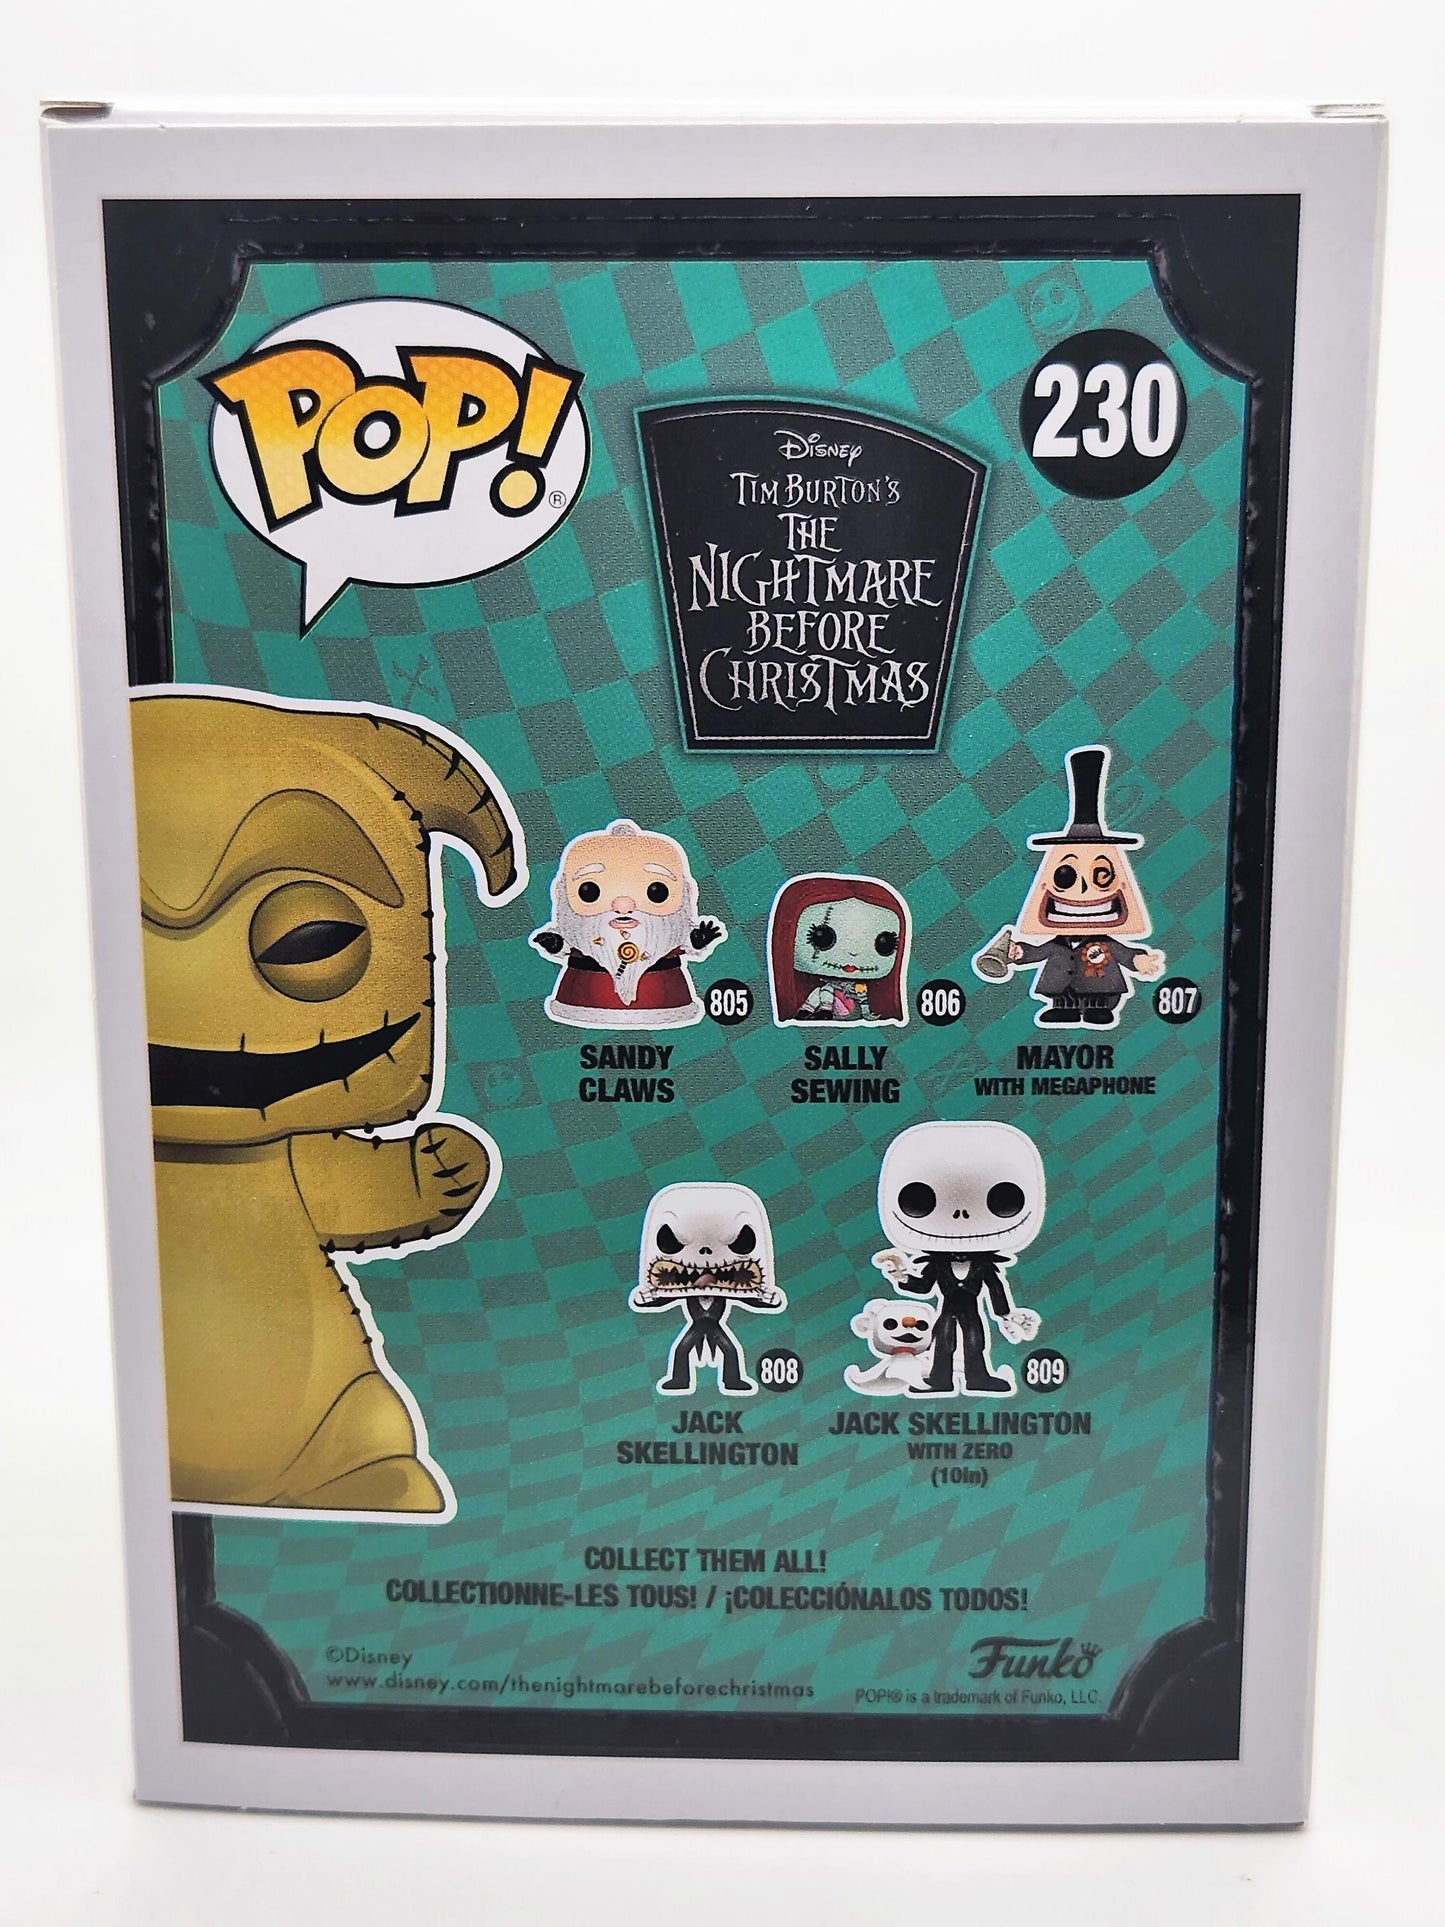 Oogie Boogie (with Bugs) (Glitter) - #230 - Box Condition 9/10